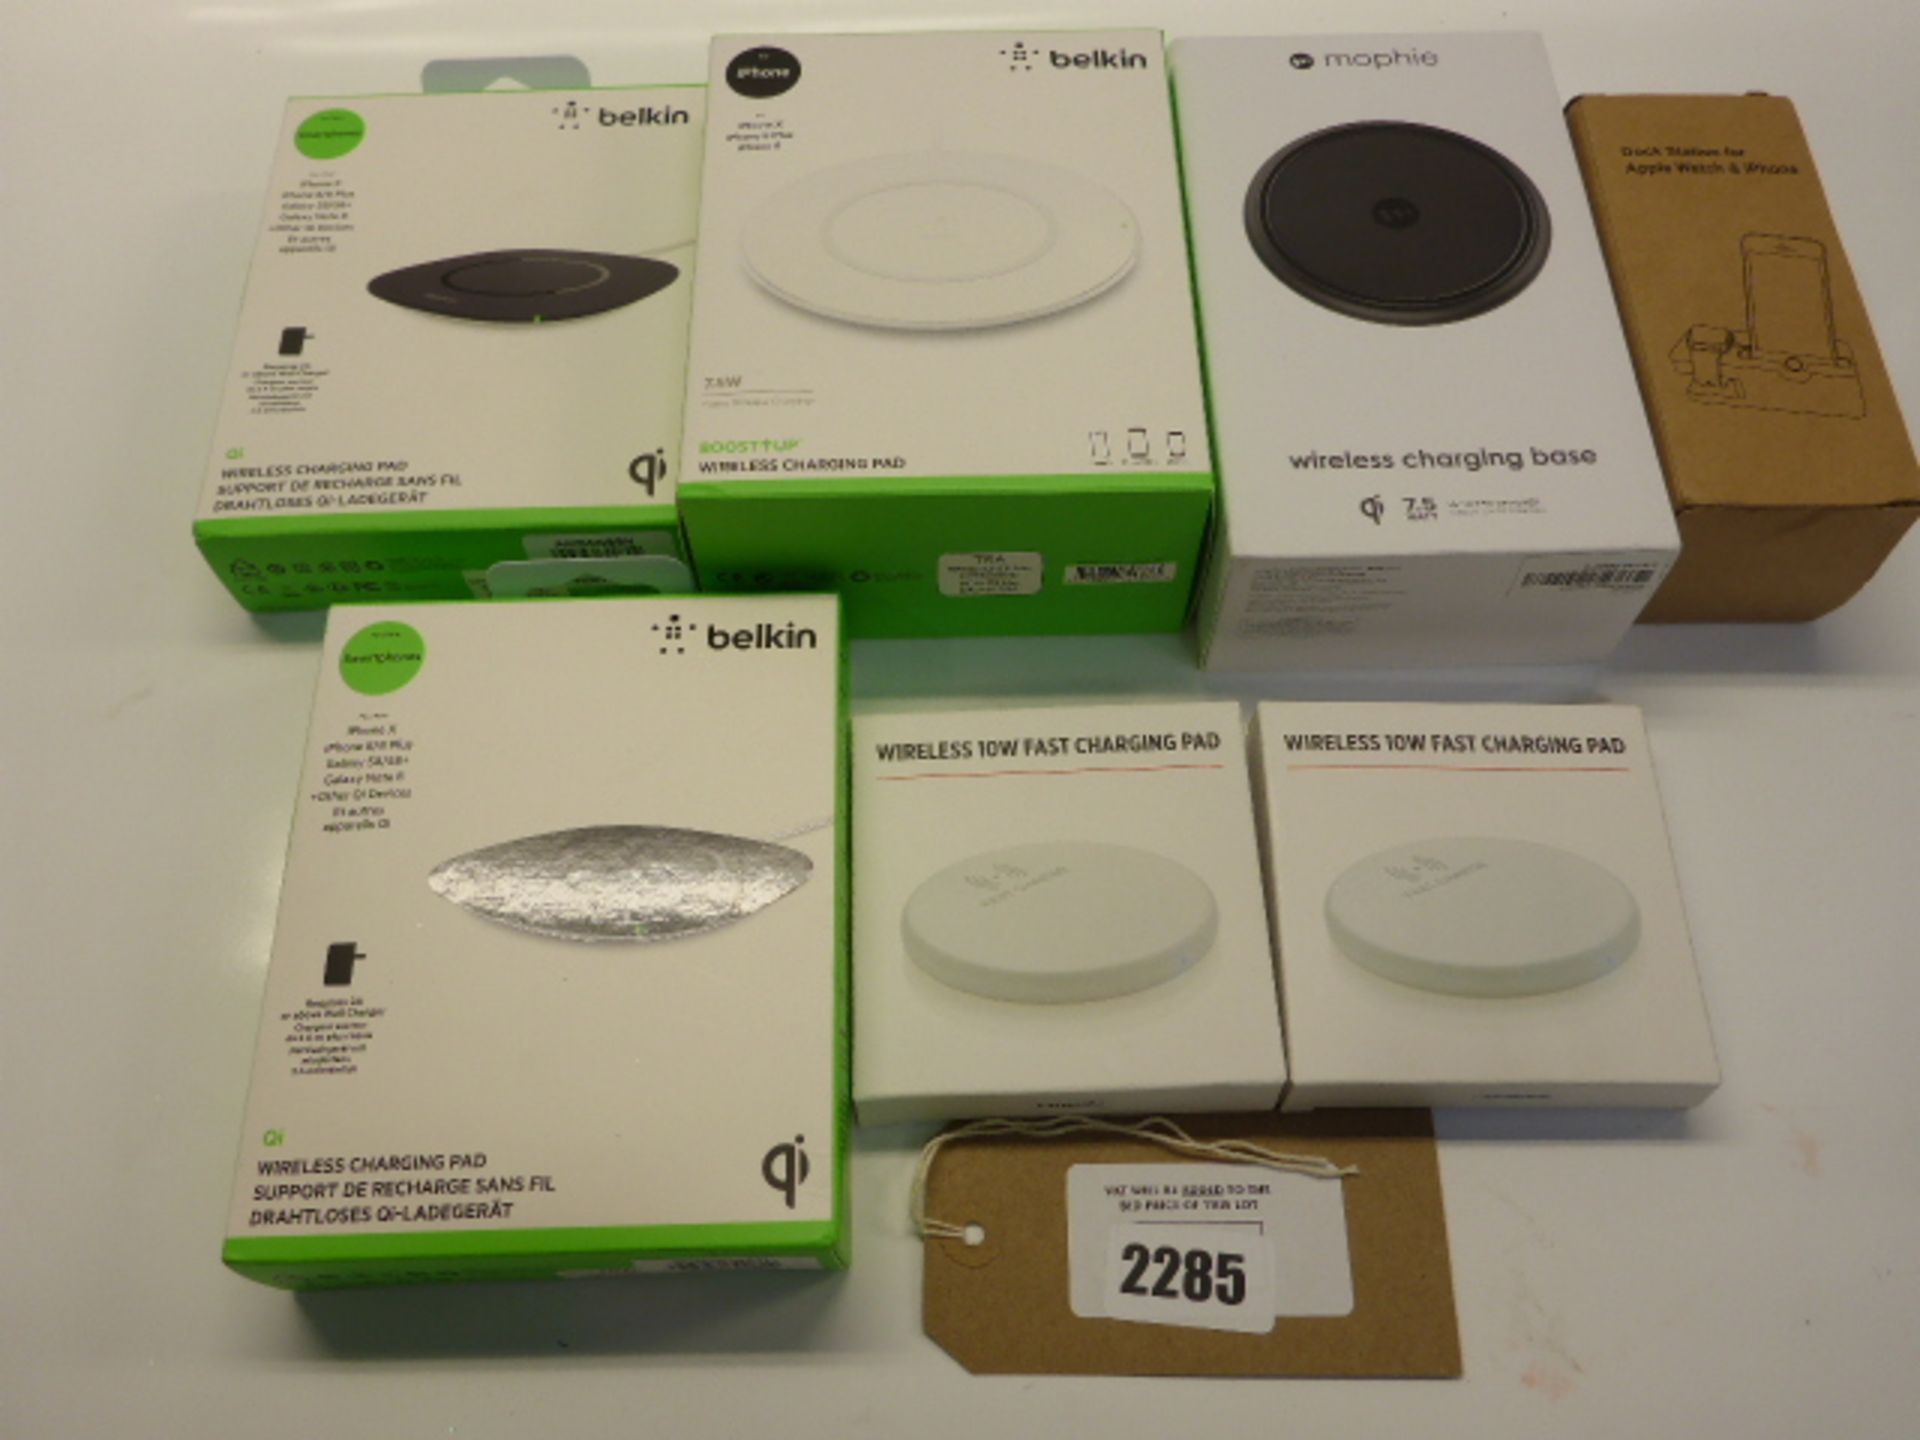 Belkin and Morphie wireless charging pads.